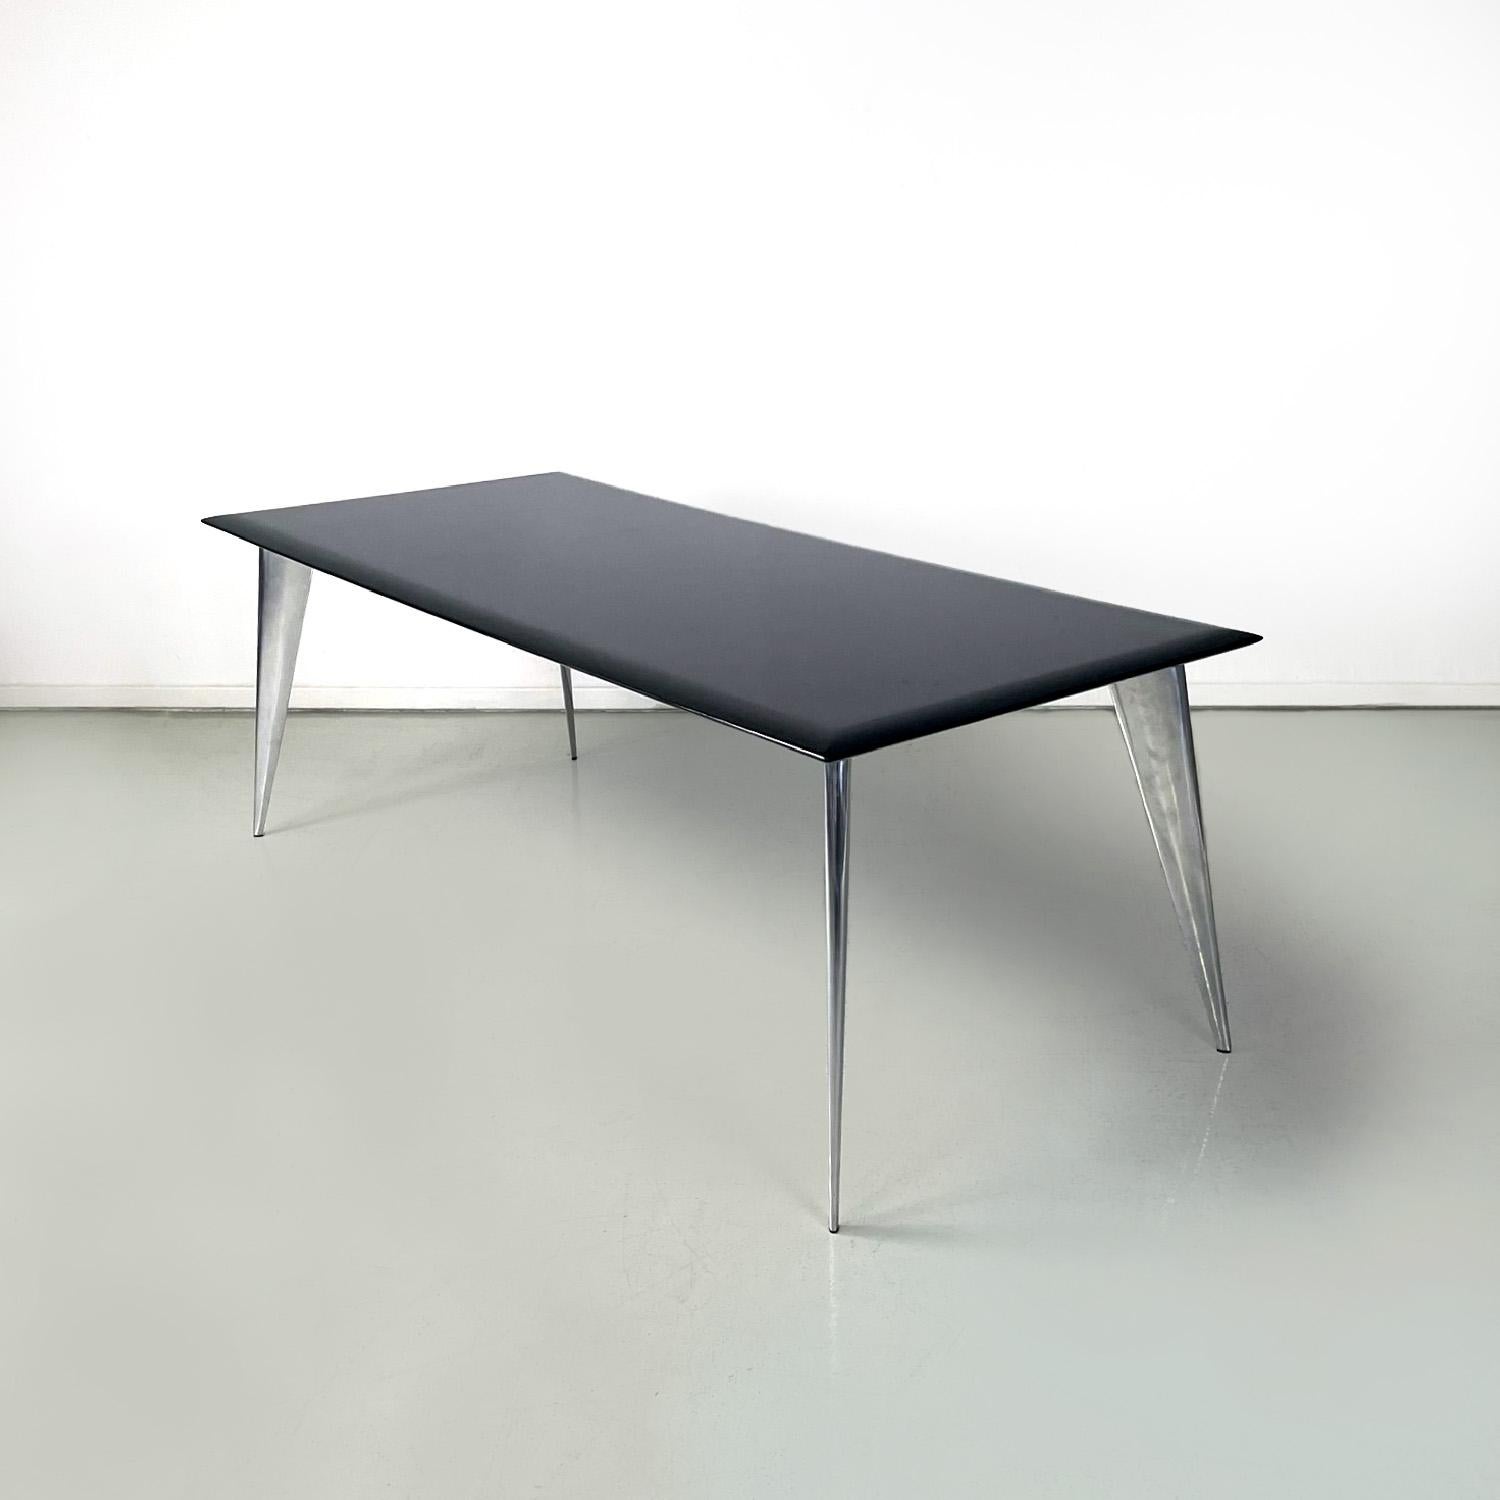 Modern Italian modern black dining table M by Philippe Starck for Driade Aleph, 1980s For Sale